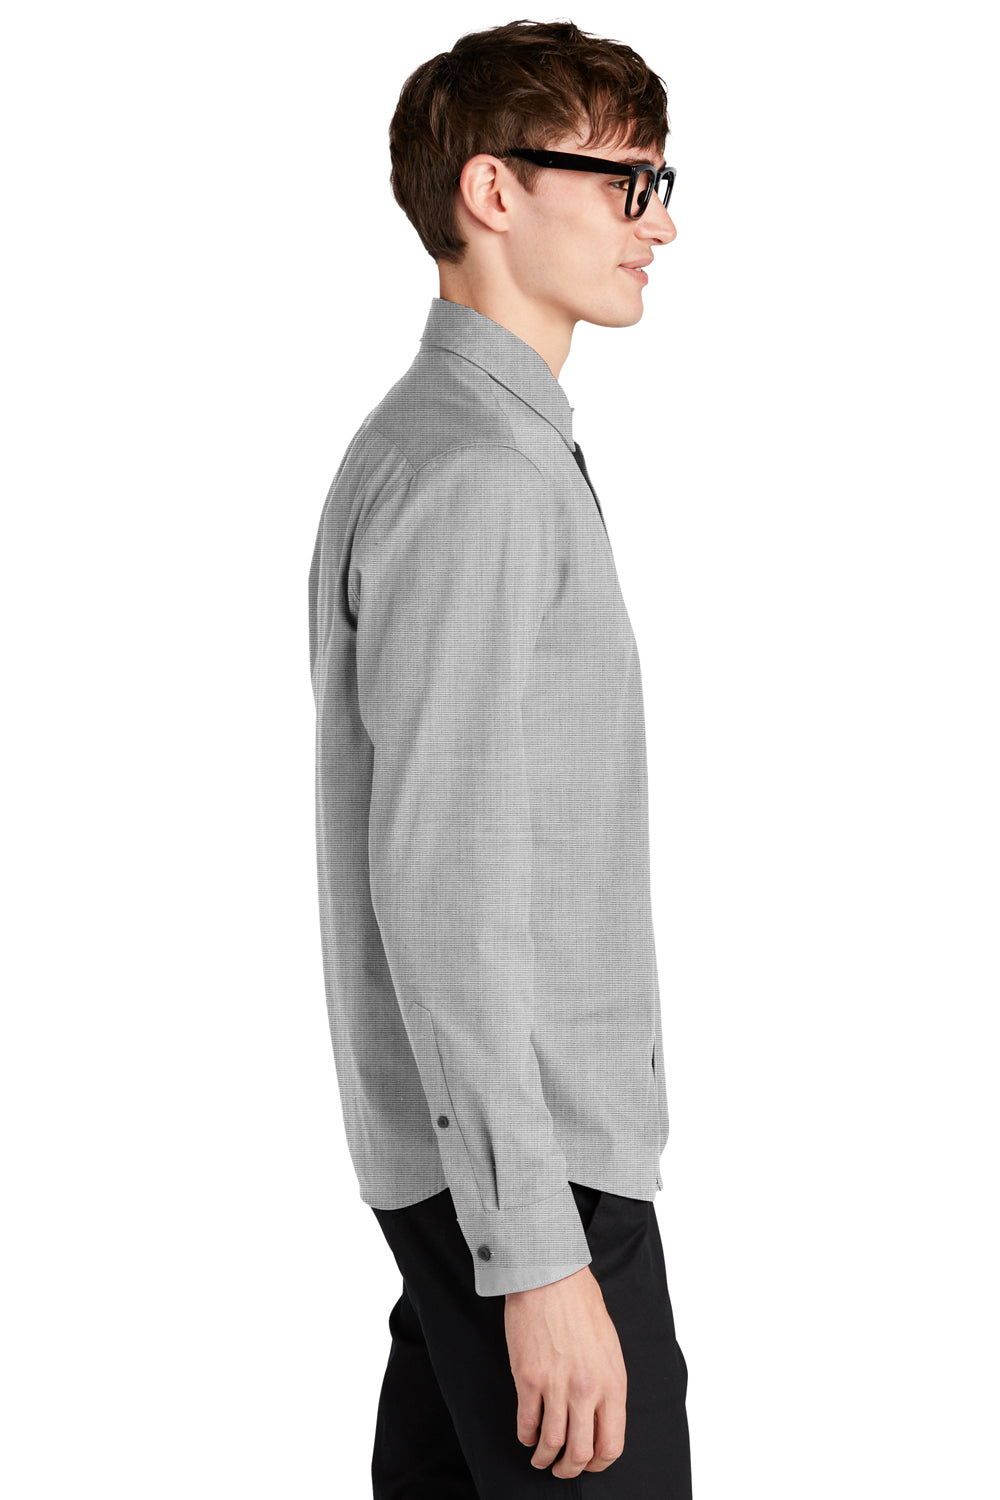 Mercer+Mettle MM2000 Stretch Woven Long Sleeve Button Down Shirt Gusty Grey Side